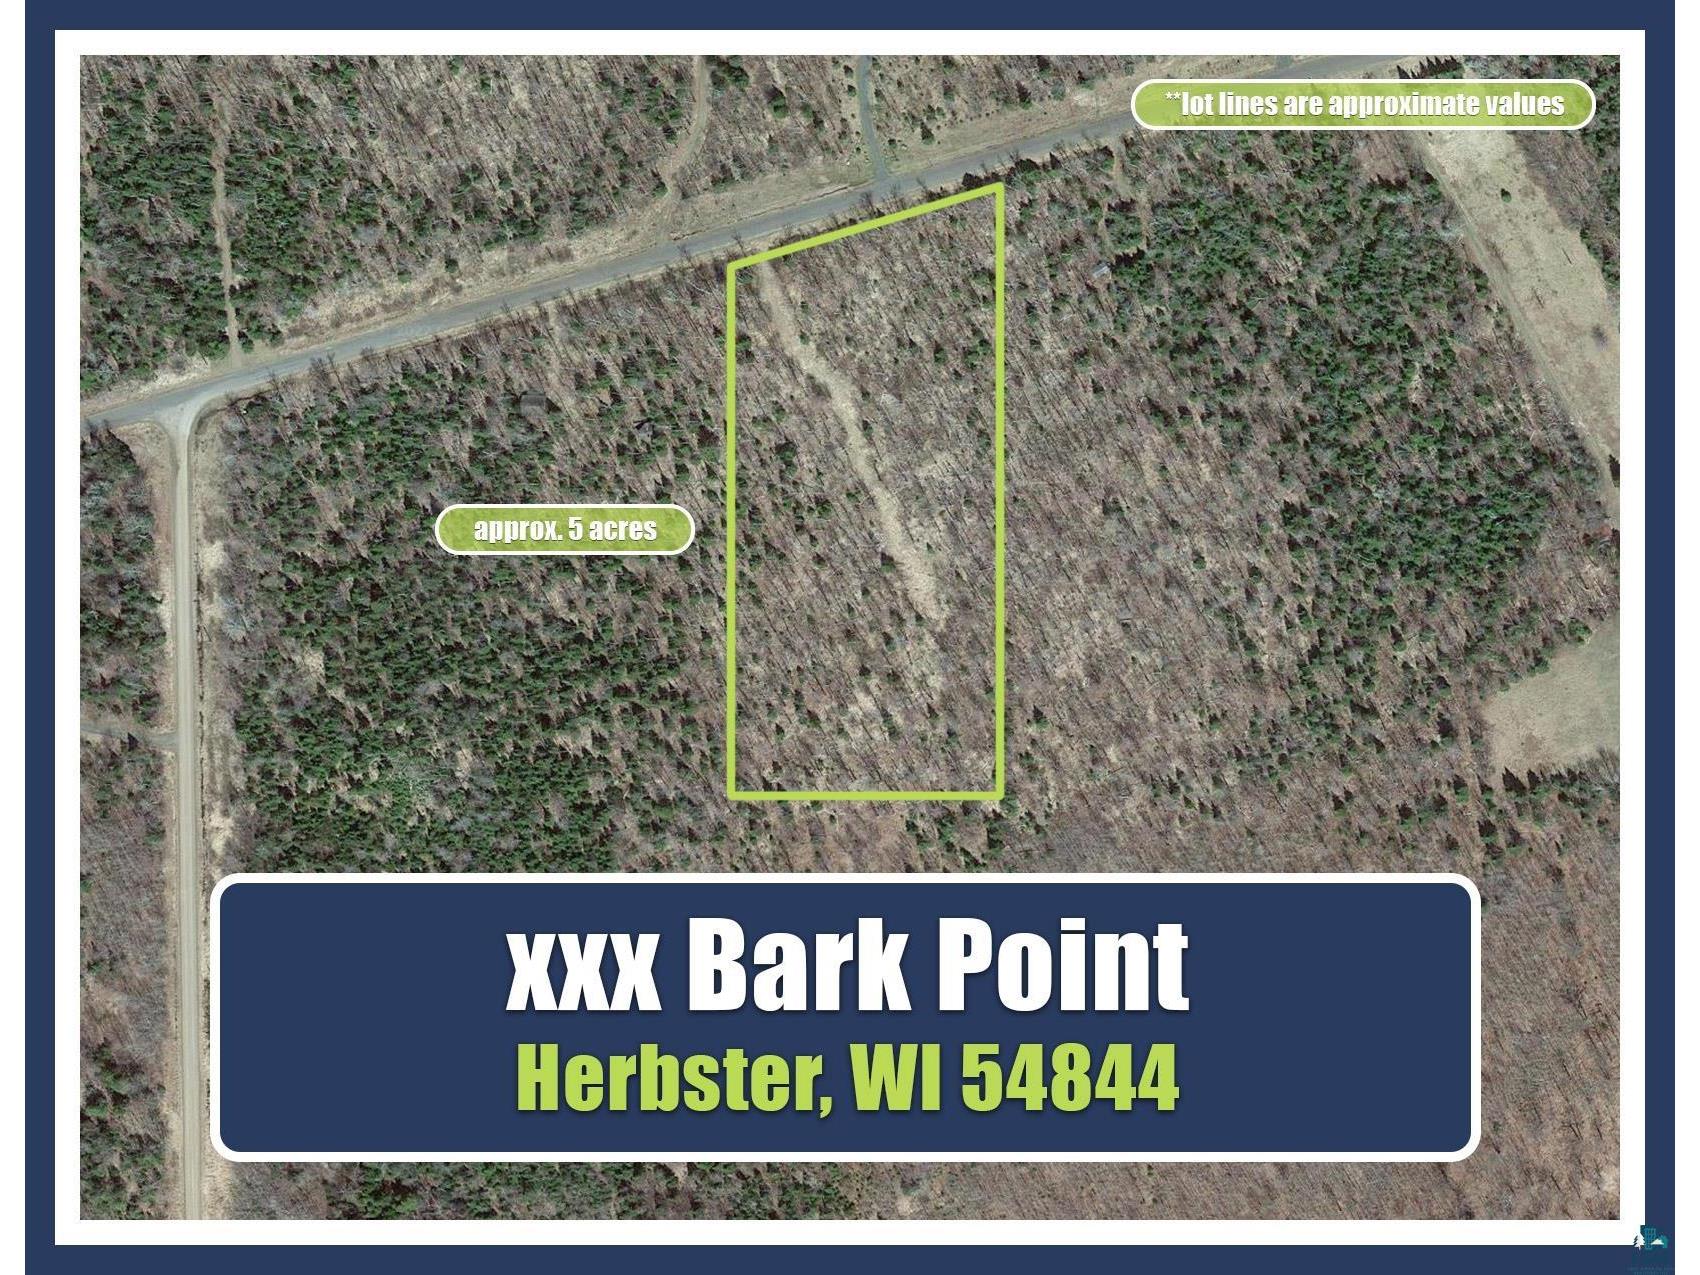 xxx Bark Point Rd Herbster WI 54844 6104051 image1